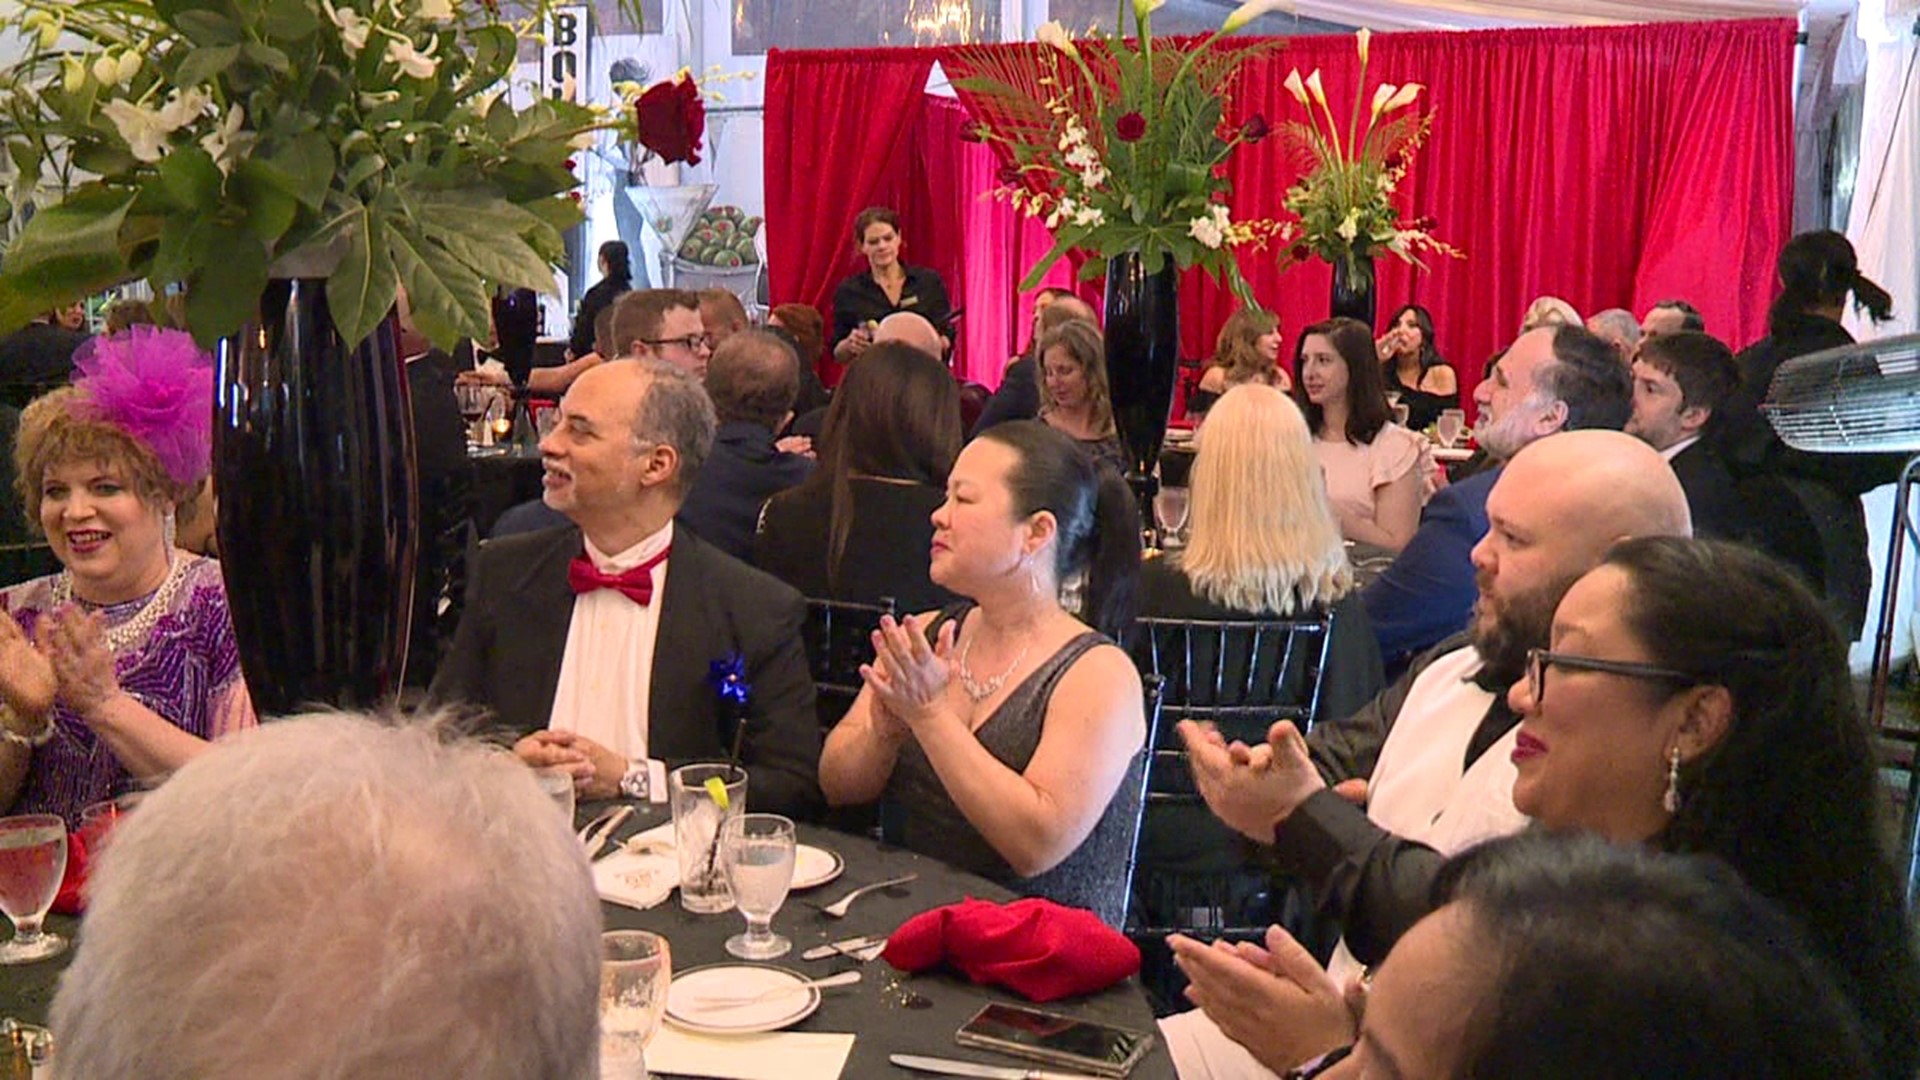 The gala was held at the Westmoreland Club along Franklin Street in Wilkes-Barre Saturday night.